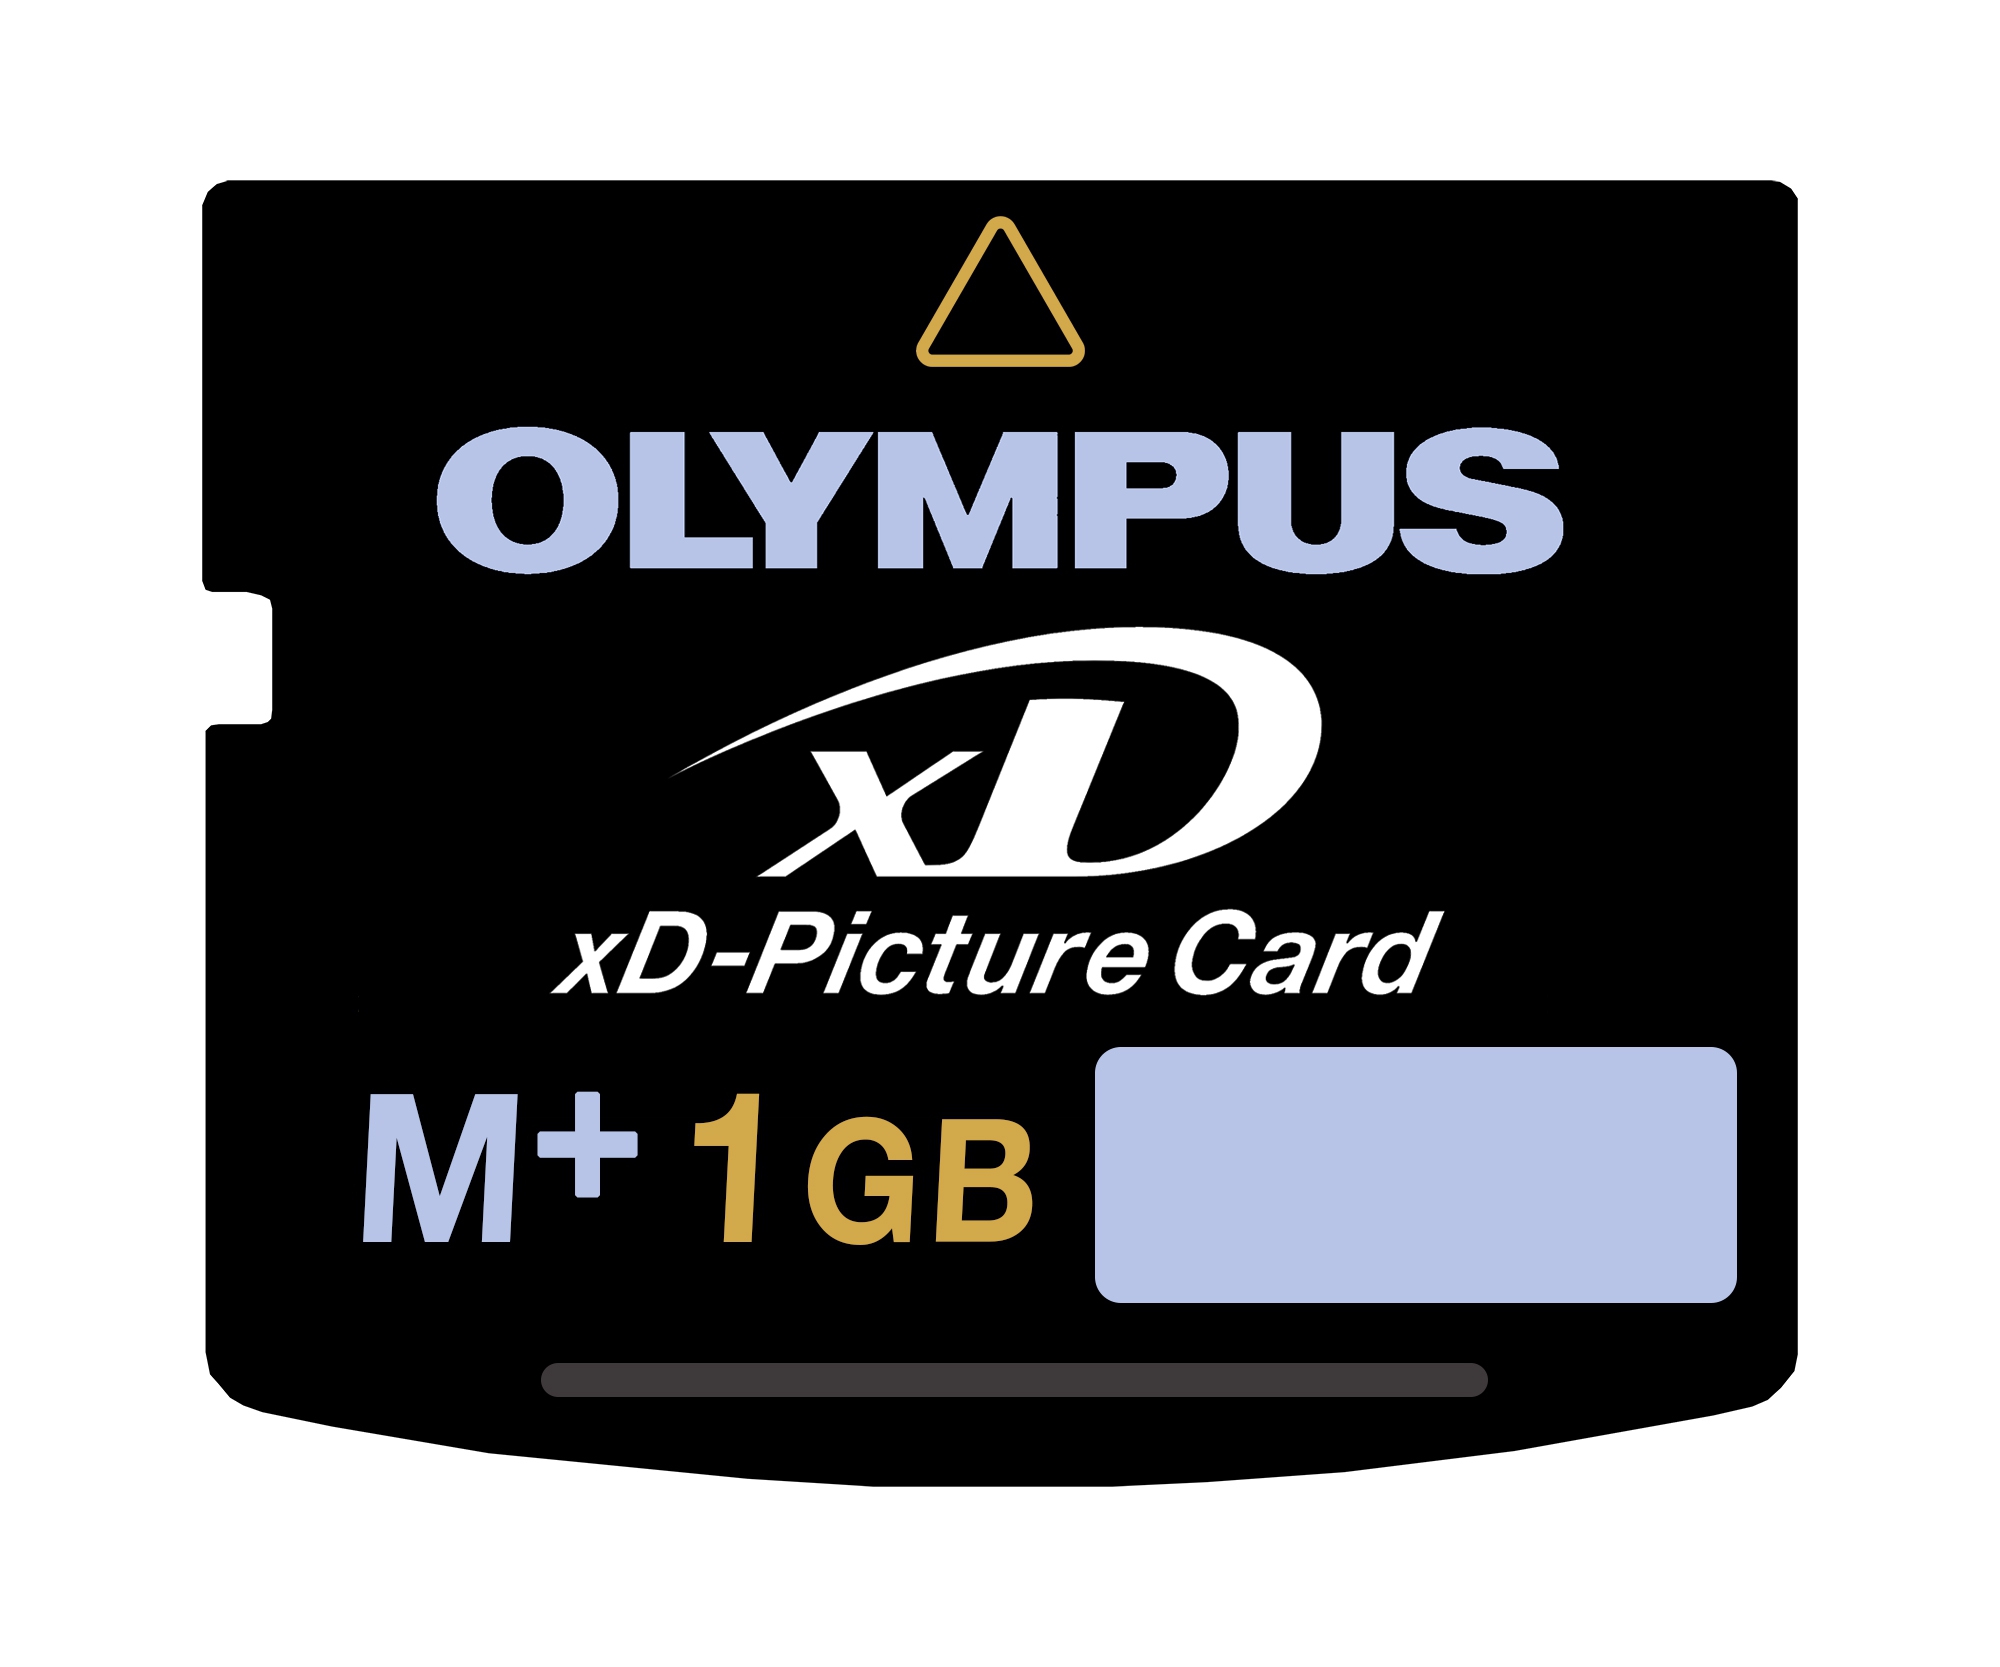 Olympus%201GB%20xD%20Picture%20Card%20Type%20M+